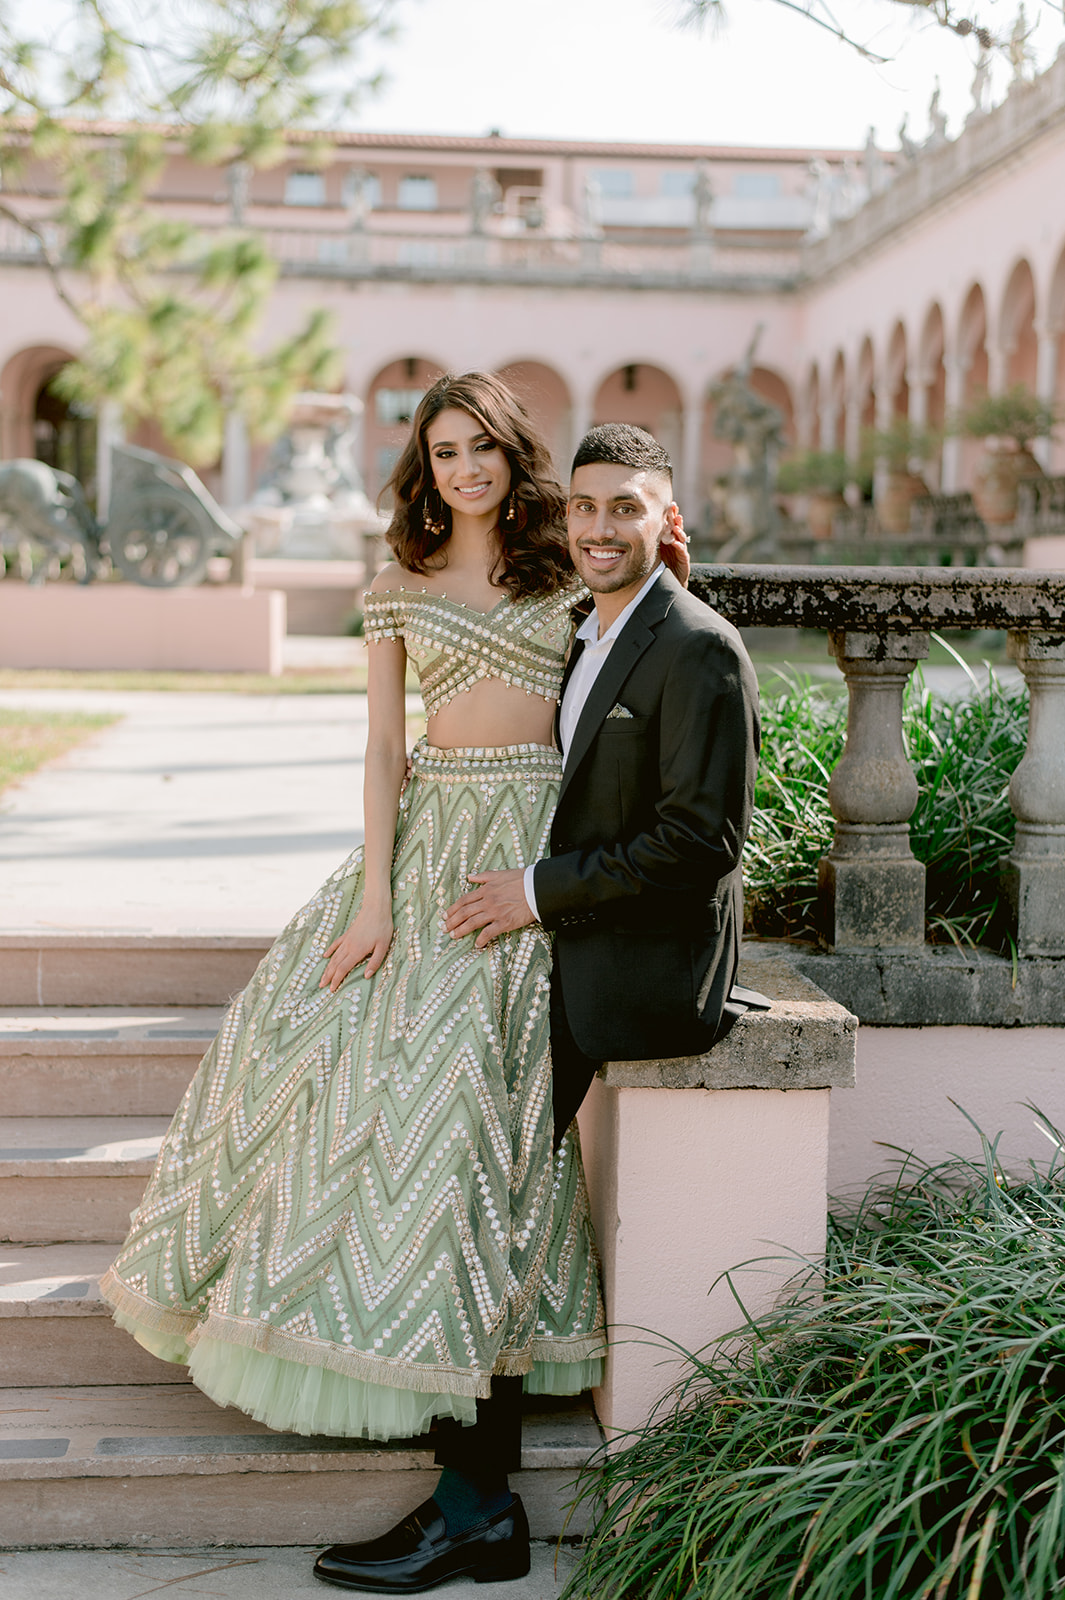 "Ringling Museum engagement shoot featuring pastel green and gold Indian outfit and stunning location"
